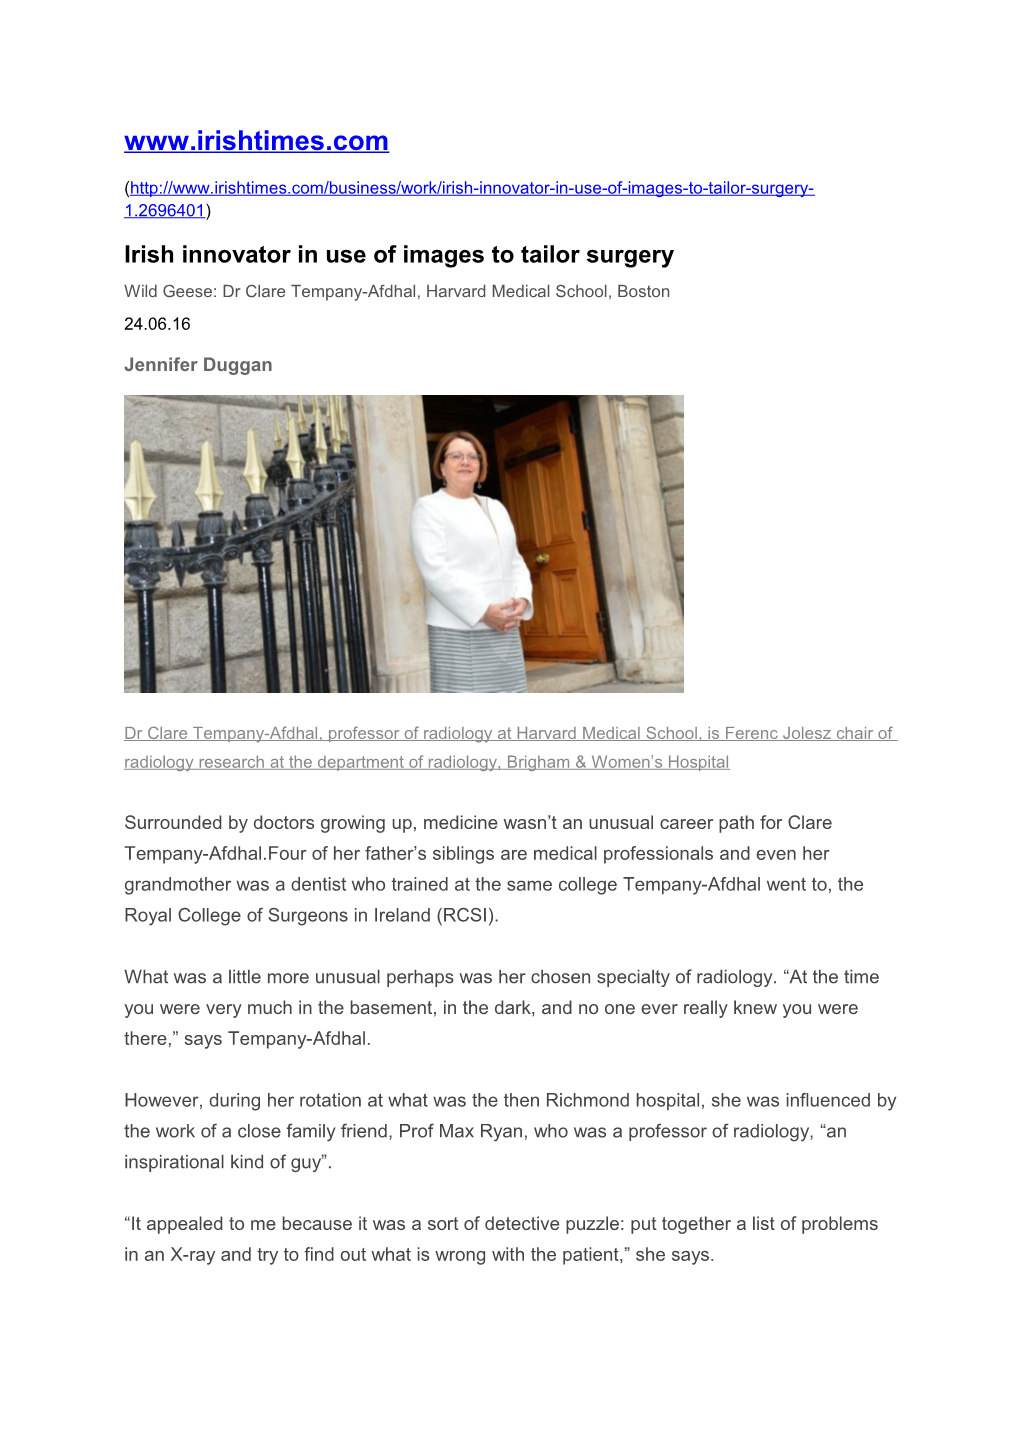 Irish Innovator in Use of Images to Tailor Surgery